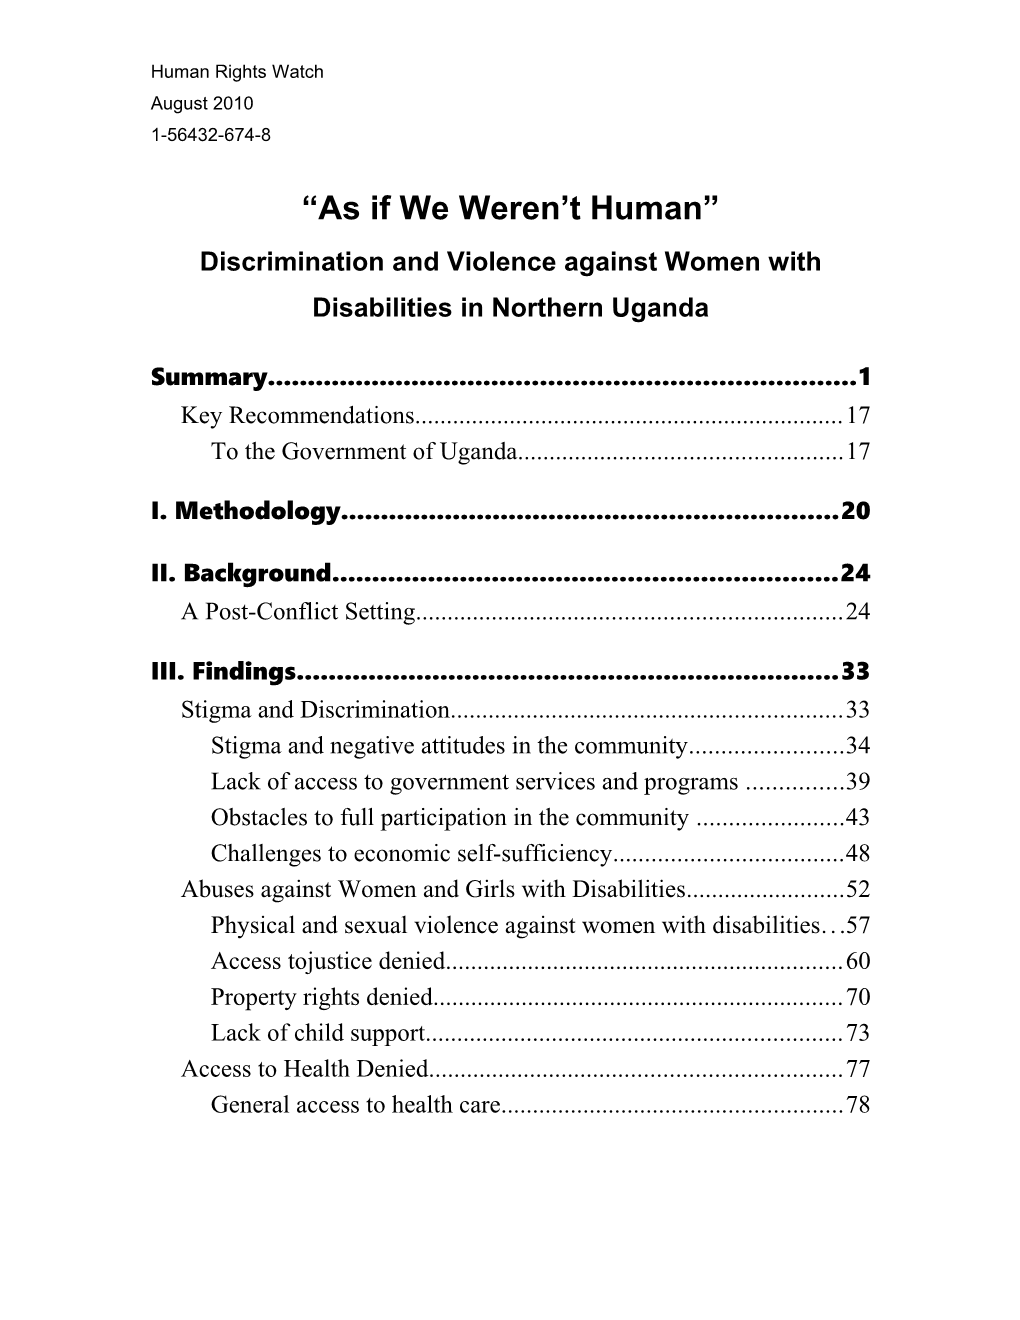 Discrimination and Violence Against Women with Disabilities in Northern Uganda